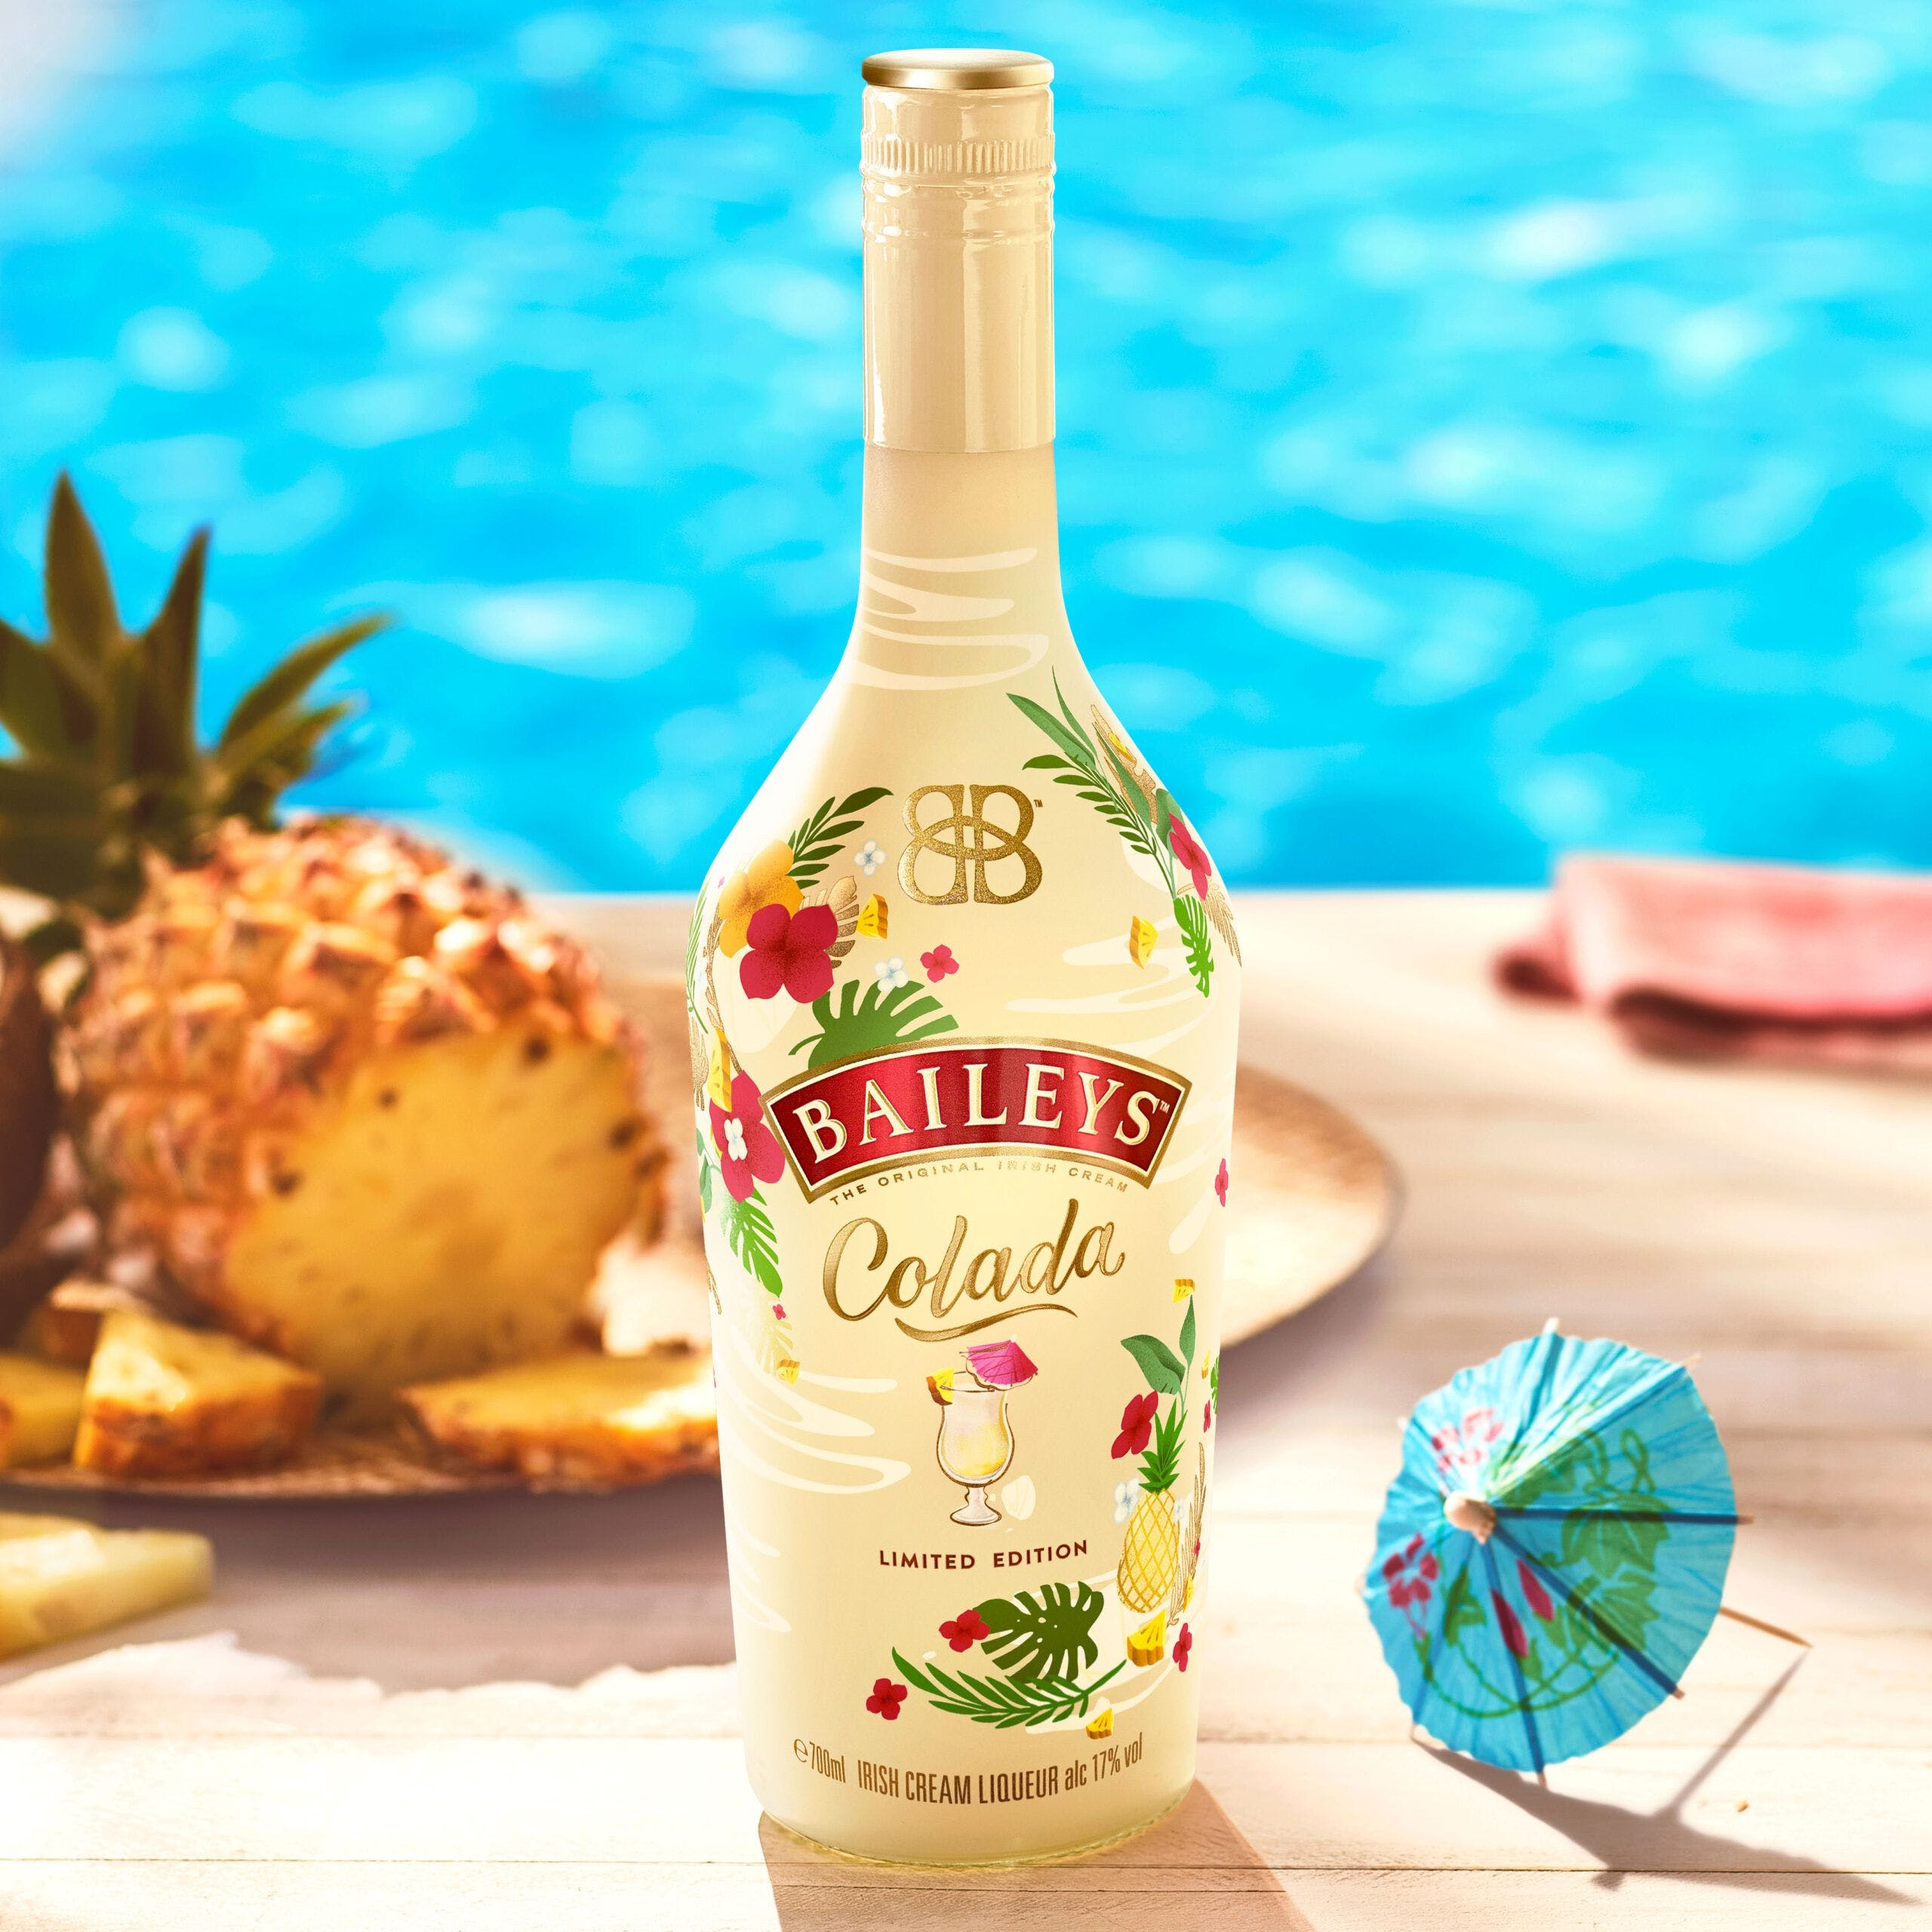 Baileys Colada has arrived in Coco Club NOW Available The Of from House - UK! Bottle the